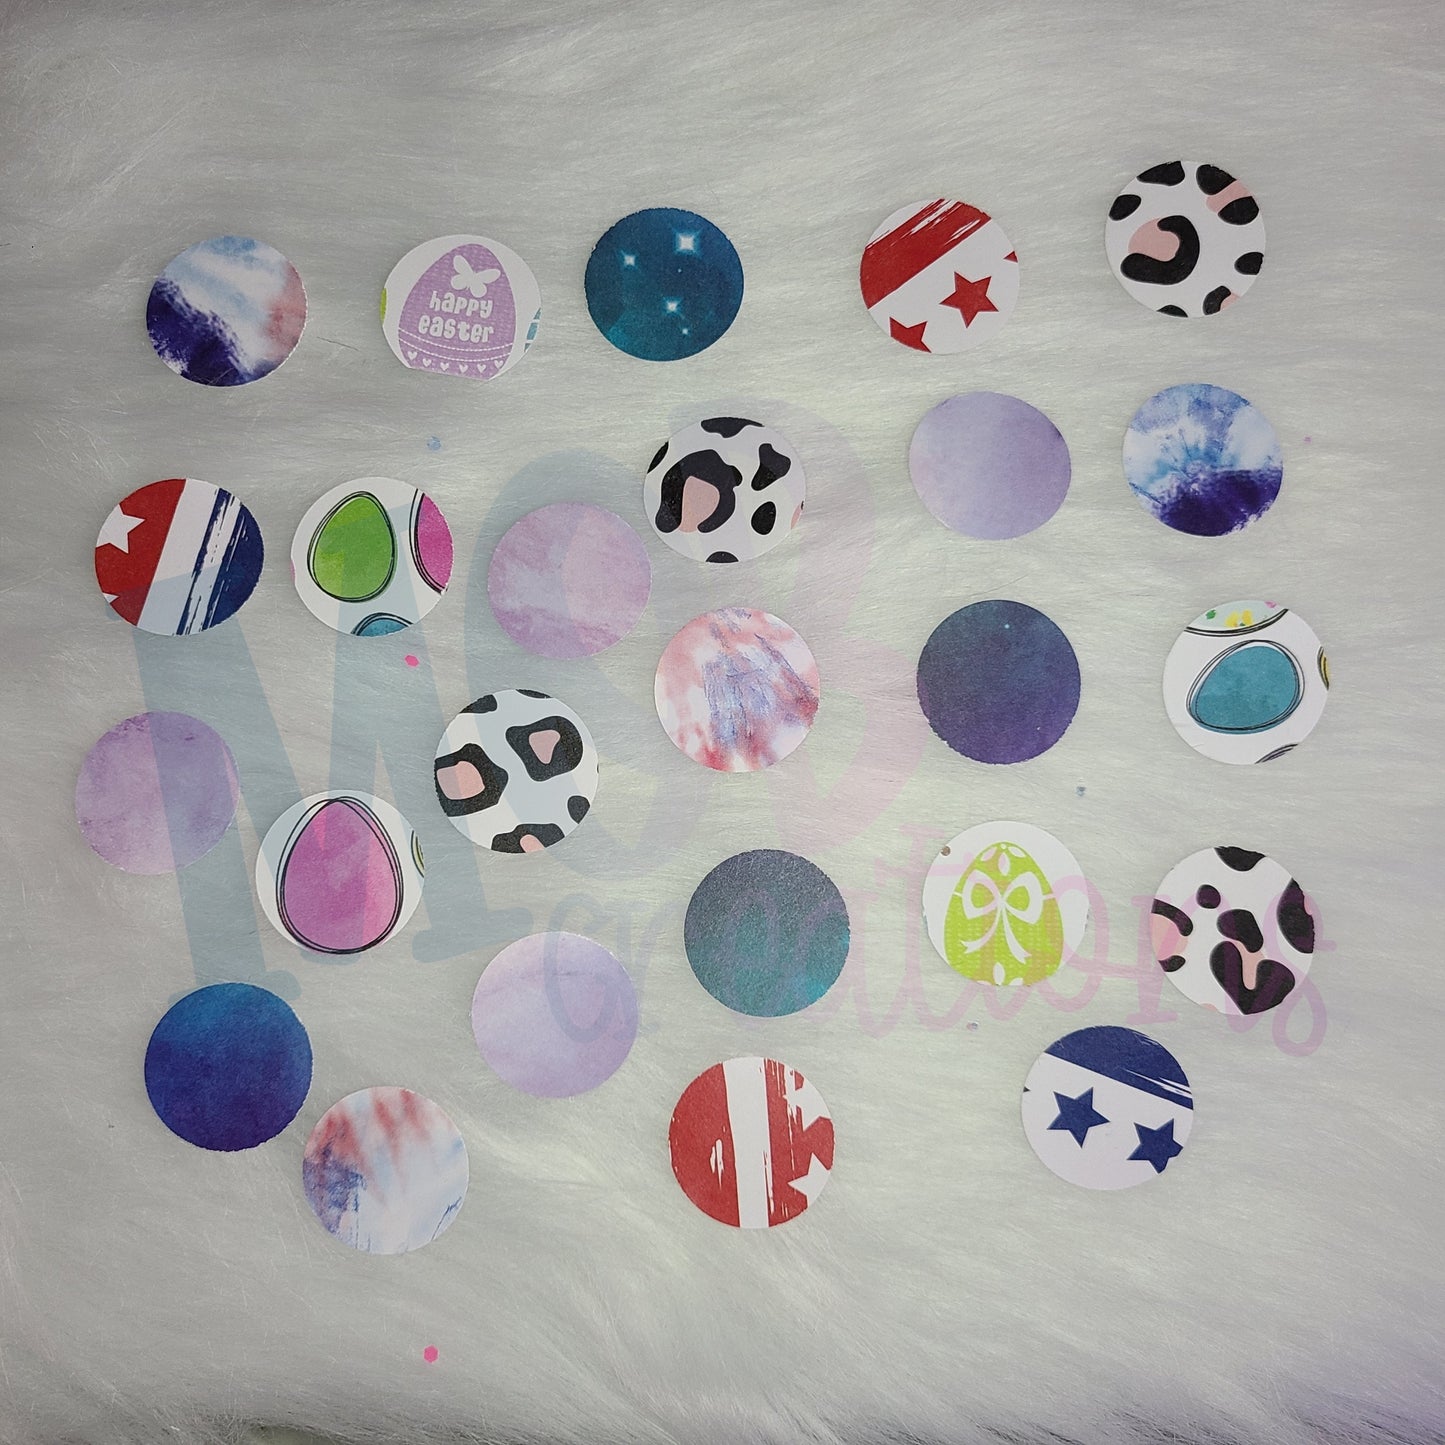 Cabochon Magnets - Pack of 10